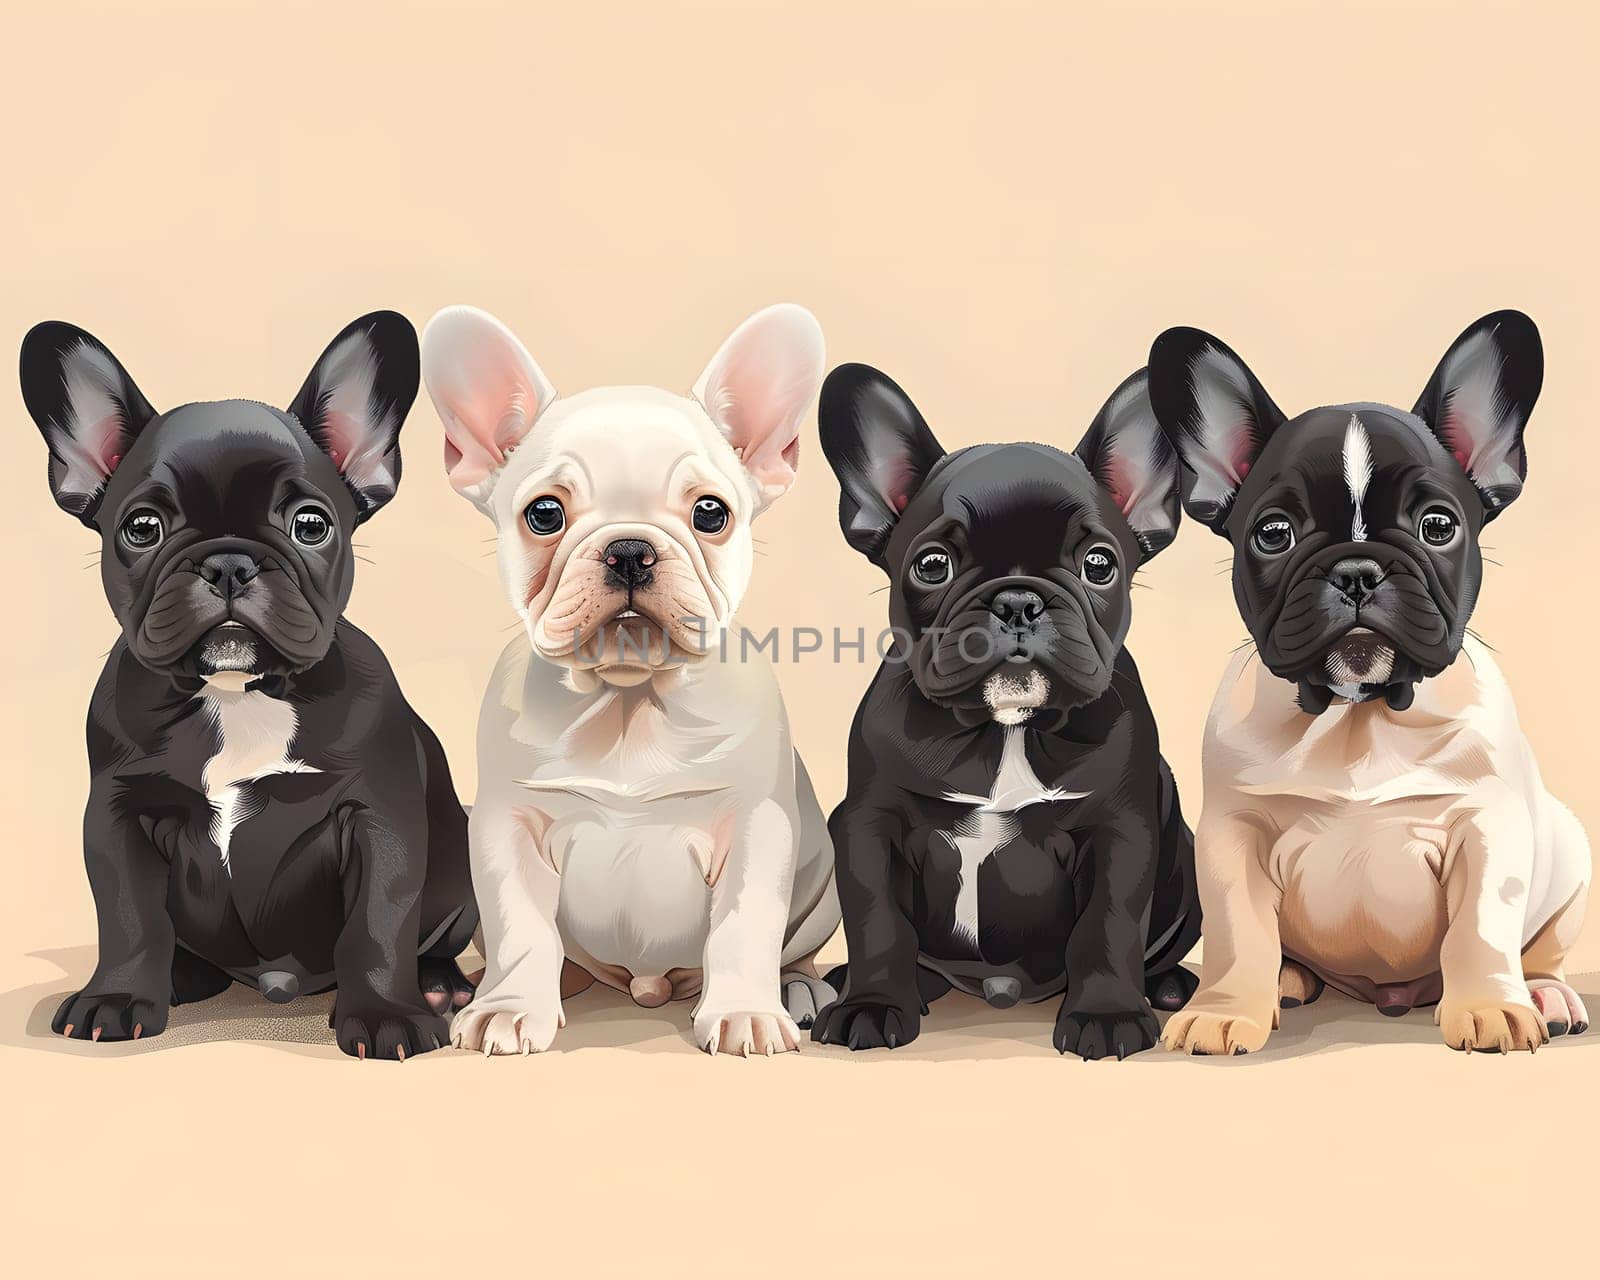 Four French bulldogs sitting together on beige background by Nadtochiy